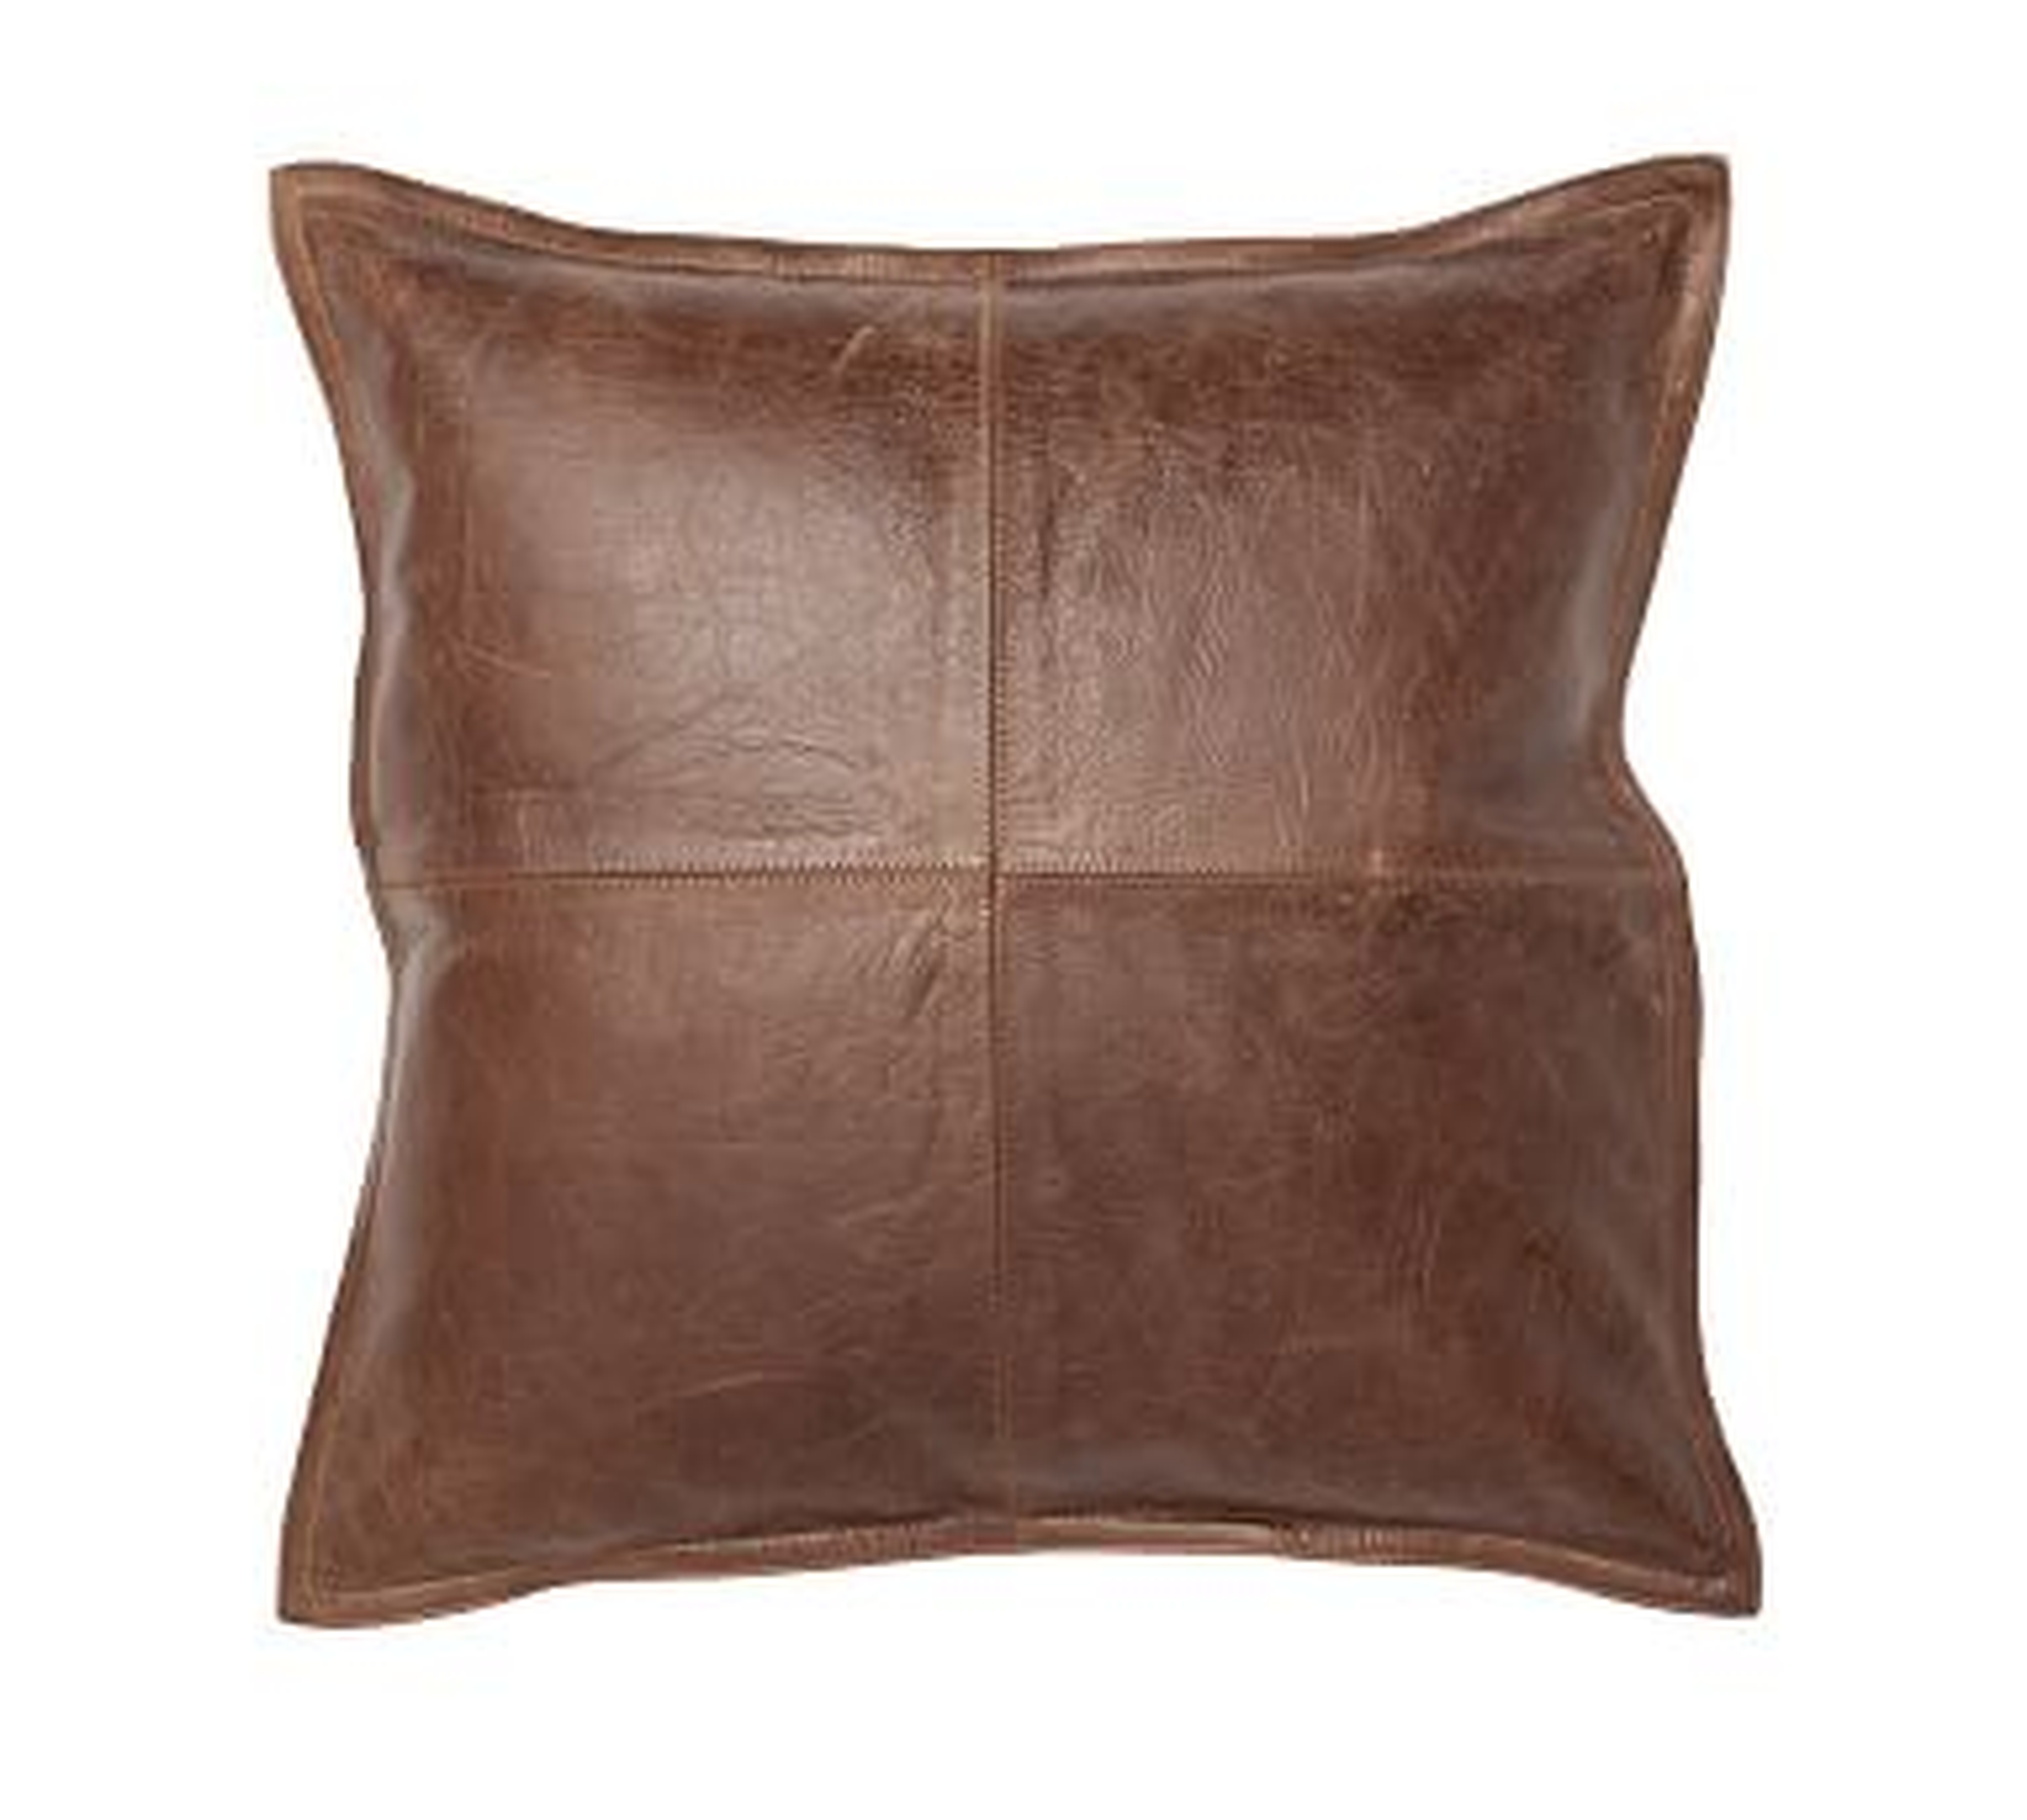 Pieced Leather Pillow Cover, 20", Whiskey Brown - Pottery Barn